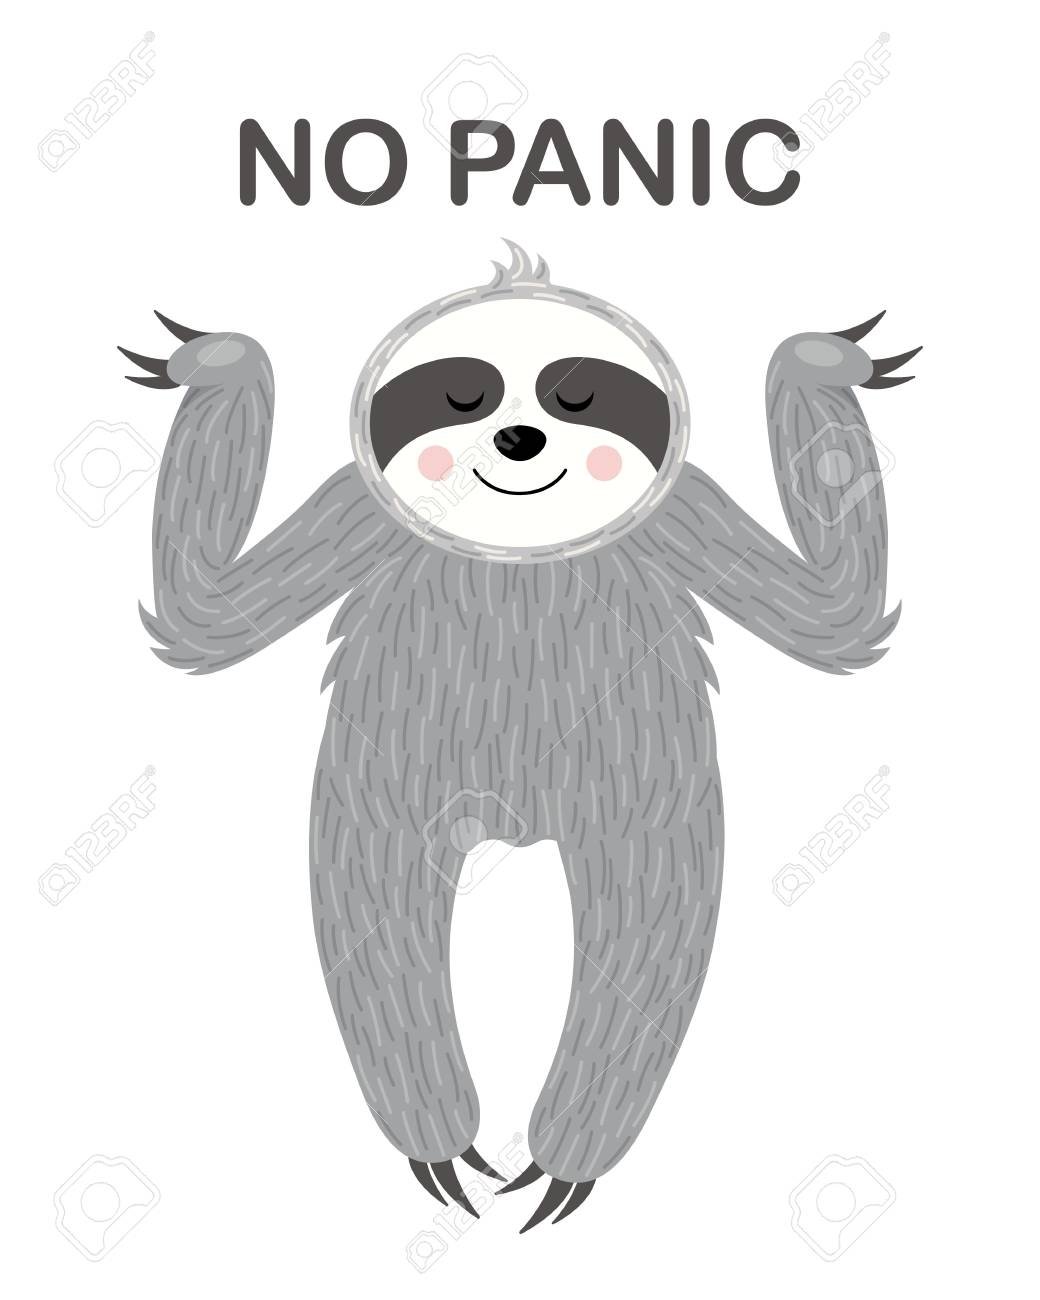 98177031-relaxed-sloth-illustration-with-no-panic-text-.jpg